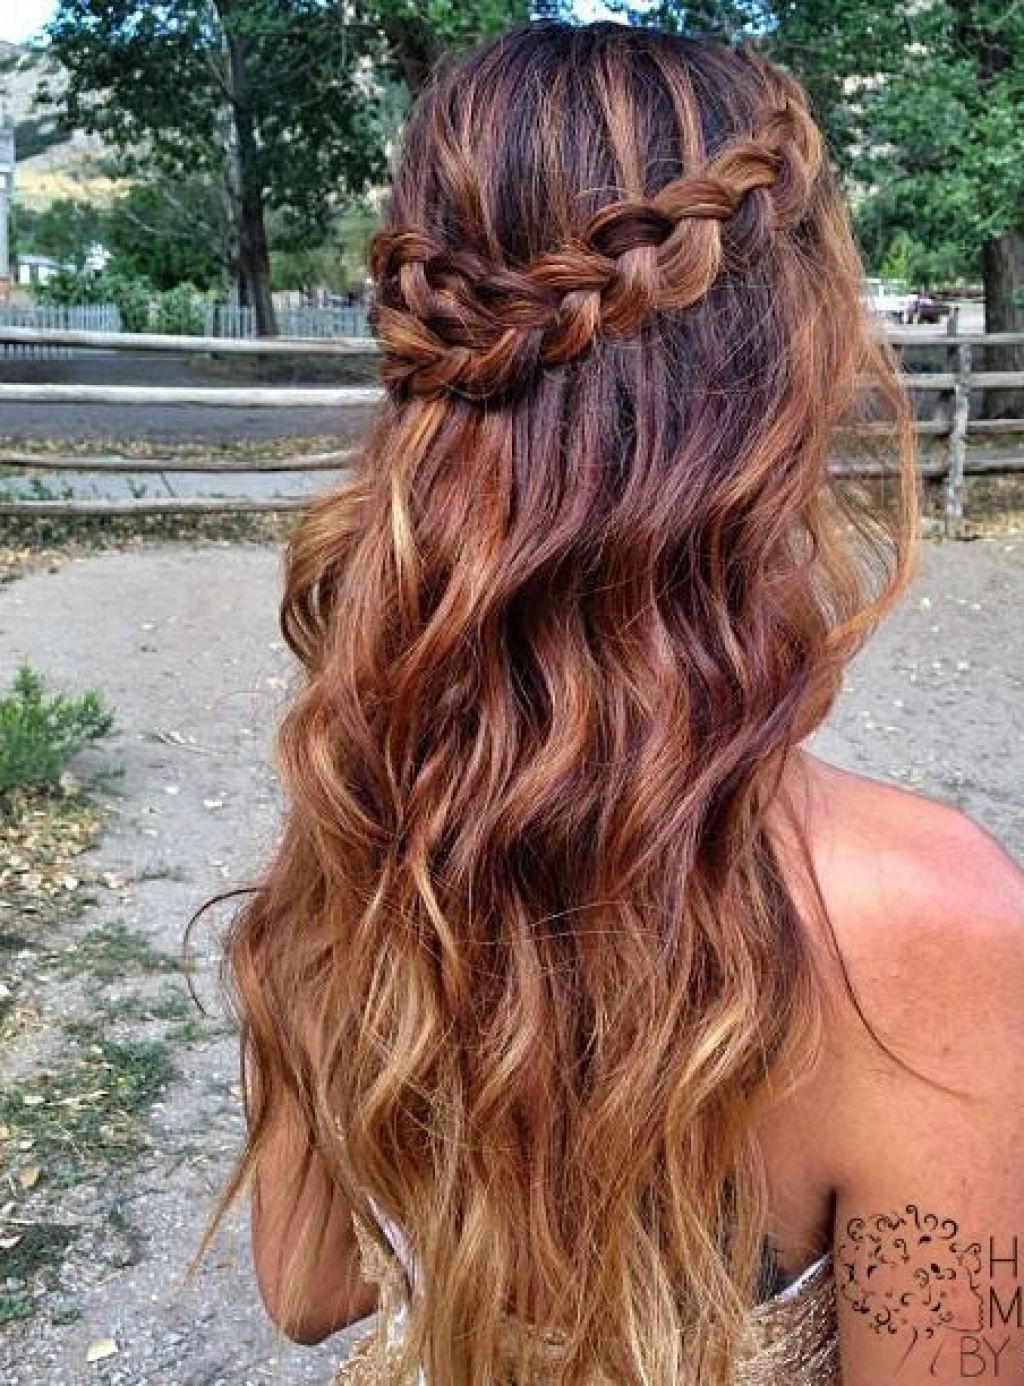 Prom hairstyles – 35 methods to complete your look – HairStyles for Women